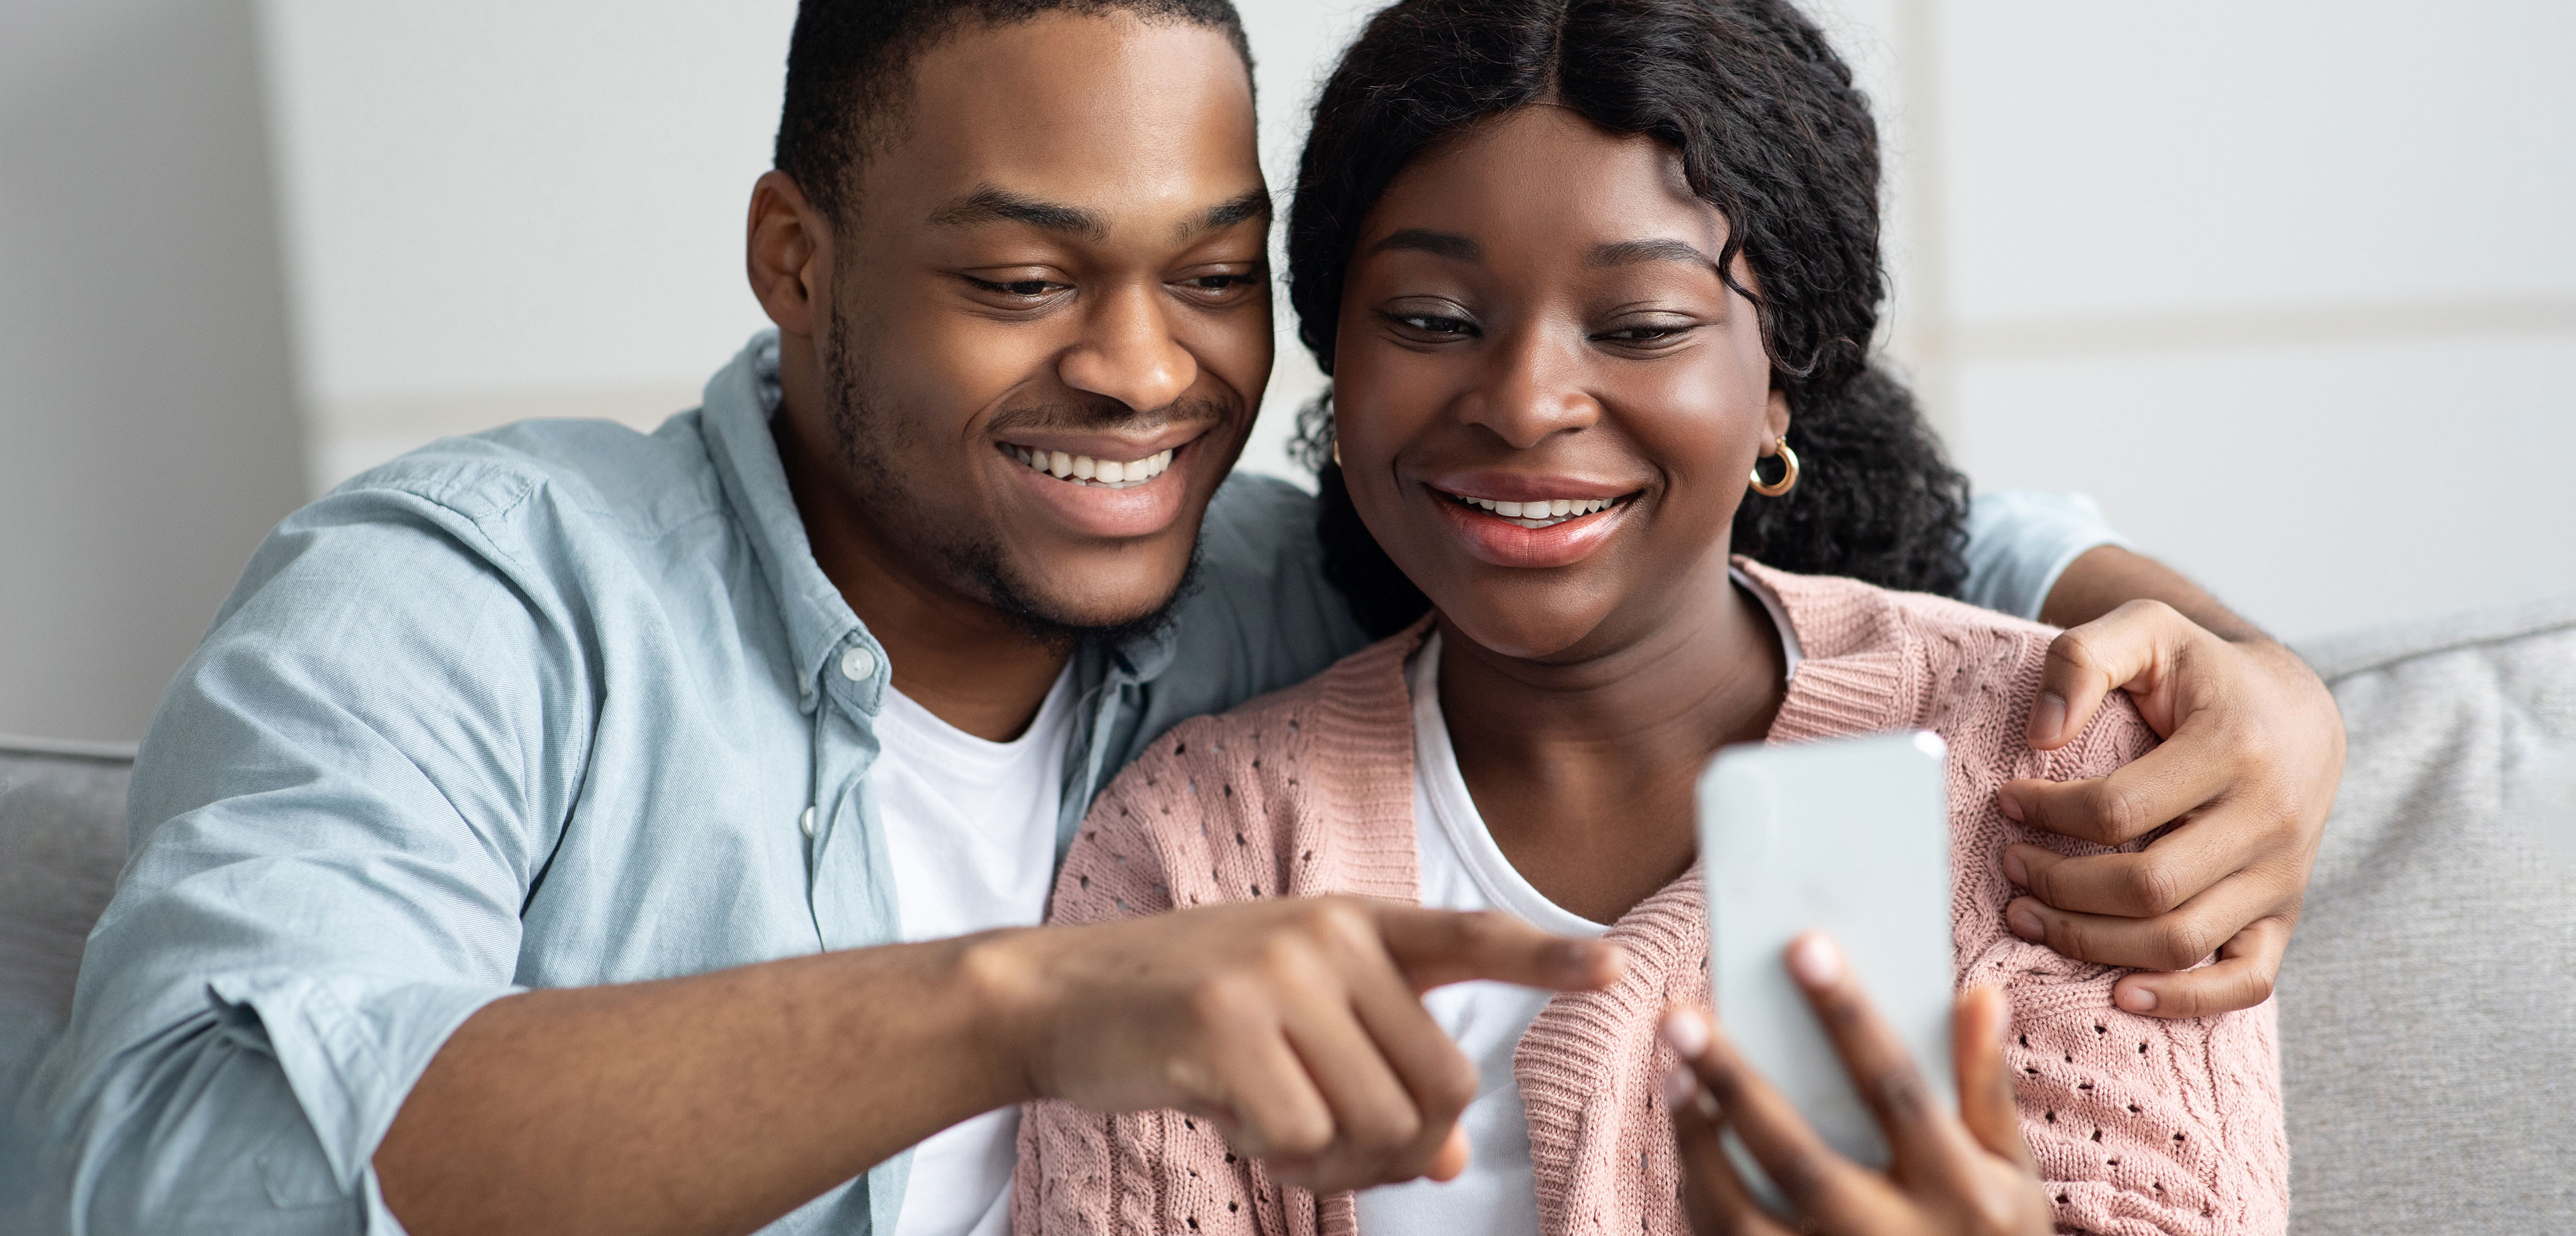 A man sat on the sofa with his arms around a lady, both are looking at a phone